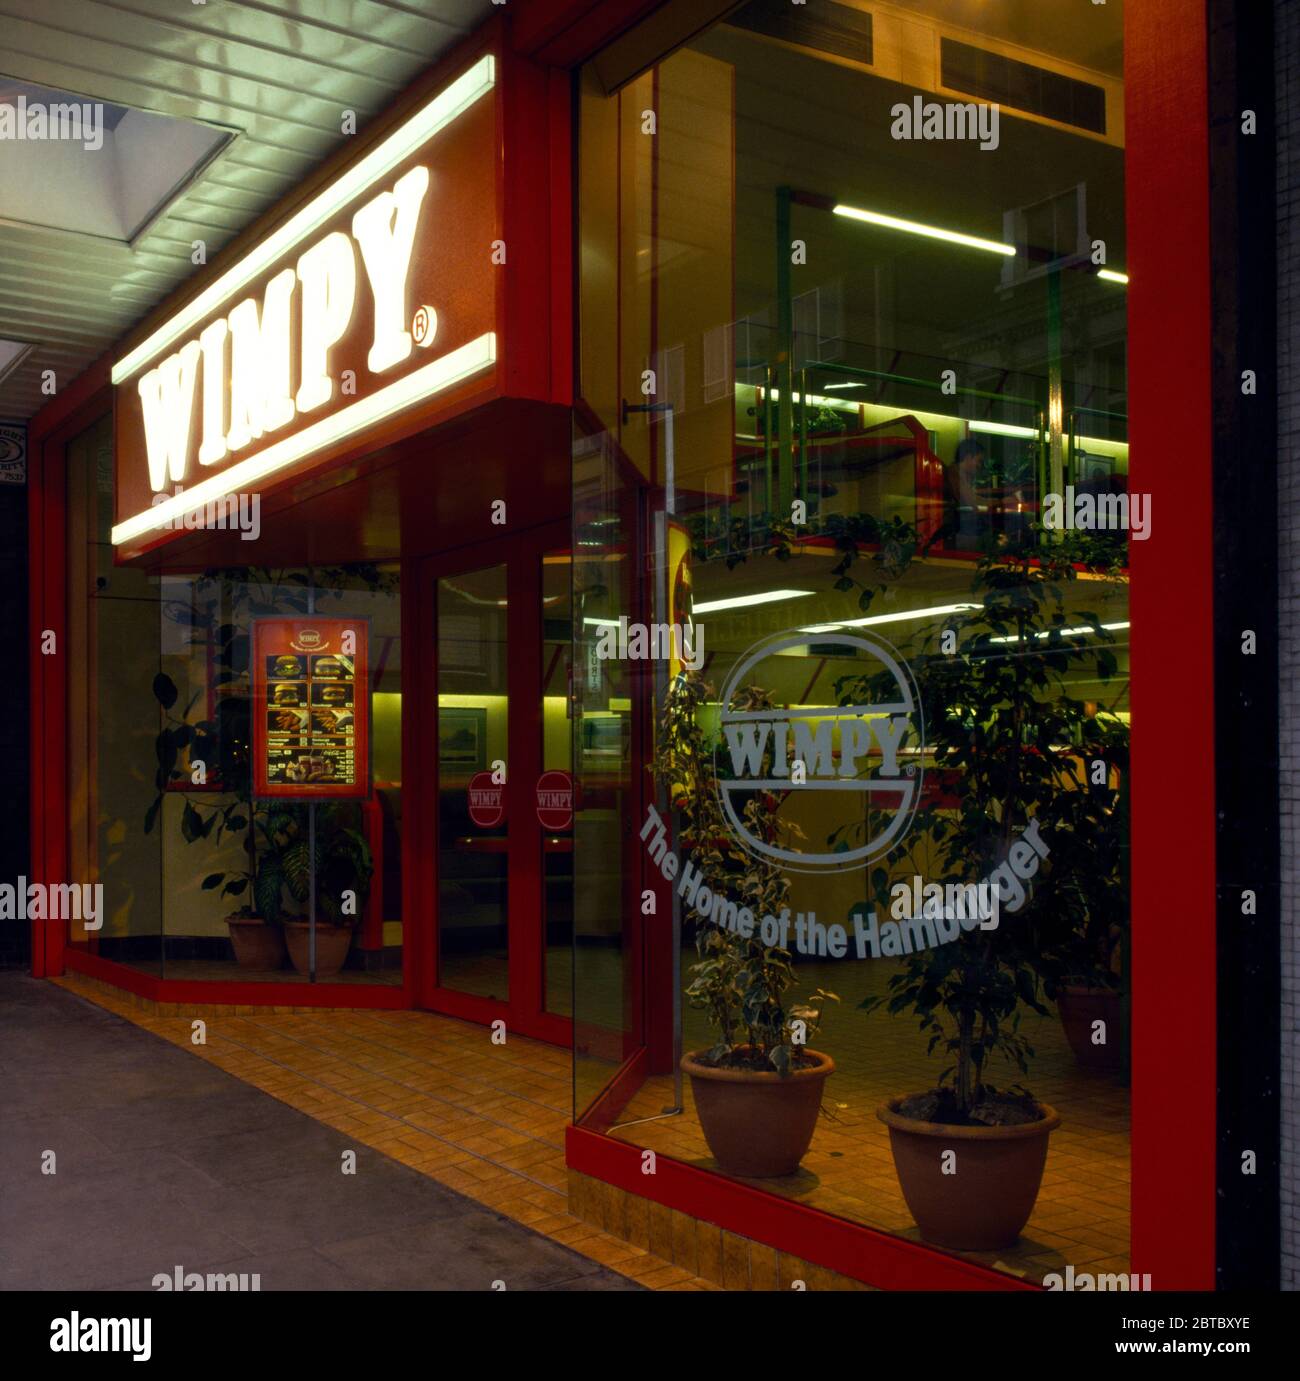 Wimpy Fast Food Shops in the seventies Stock Photo